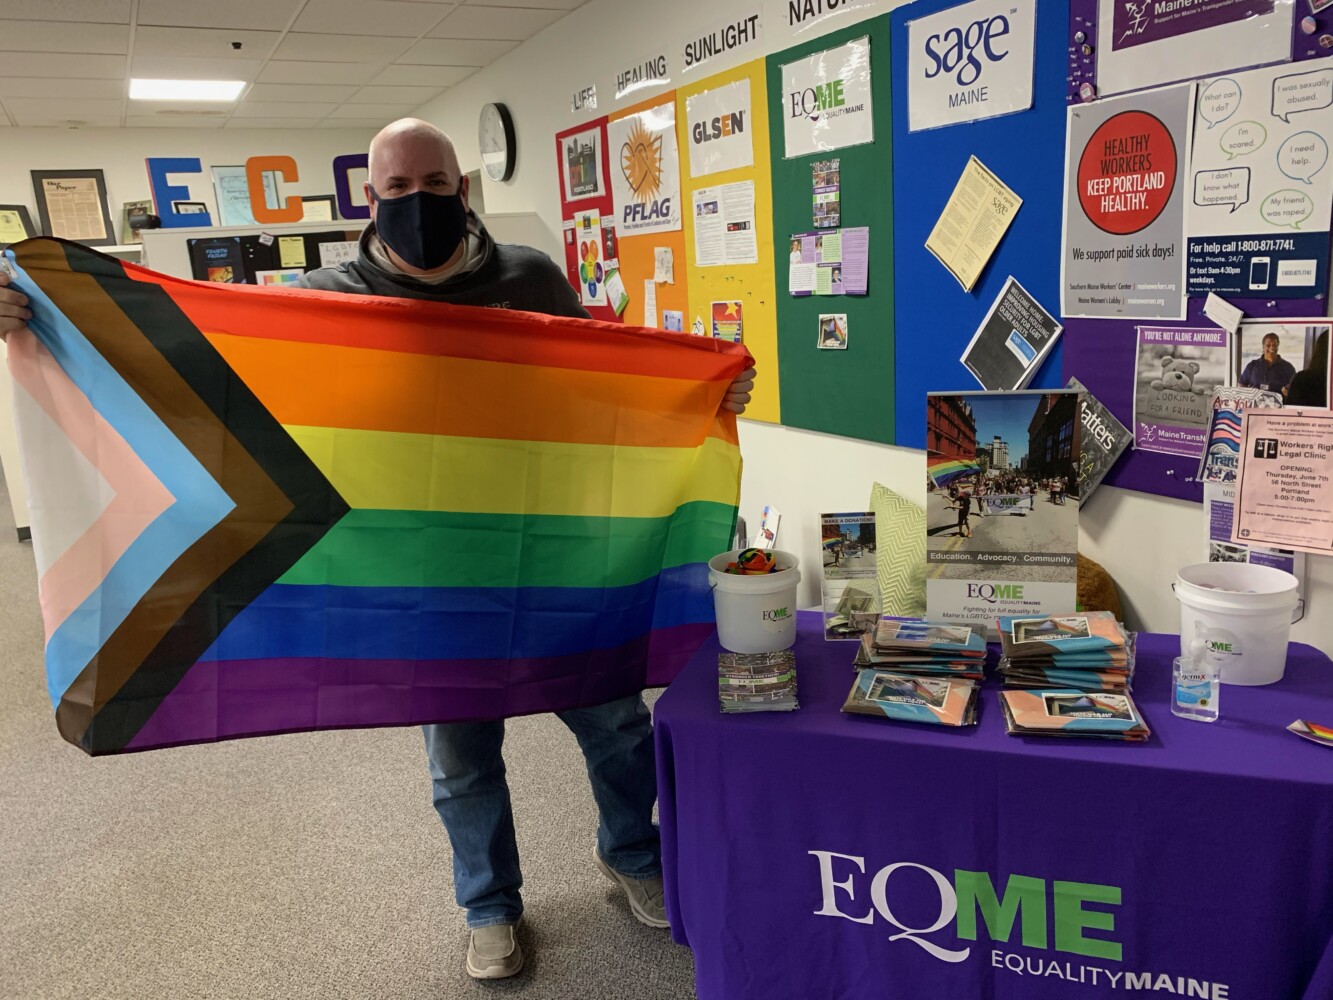 Equality Maine Annual Pride Night game at the Maine Mariners